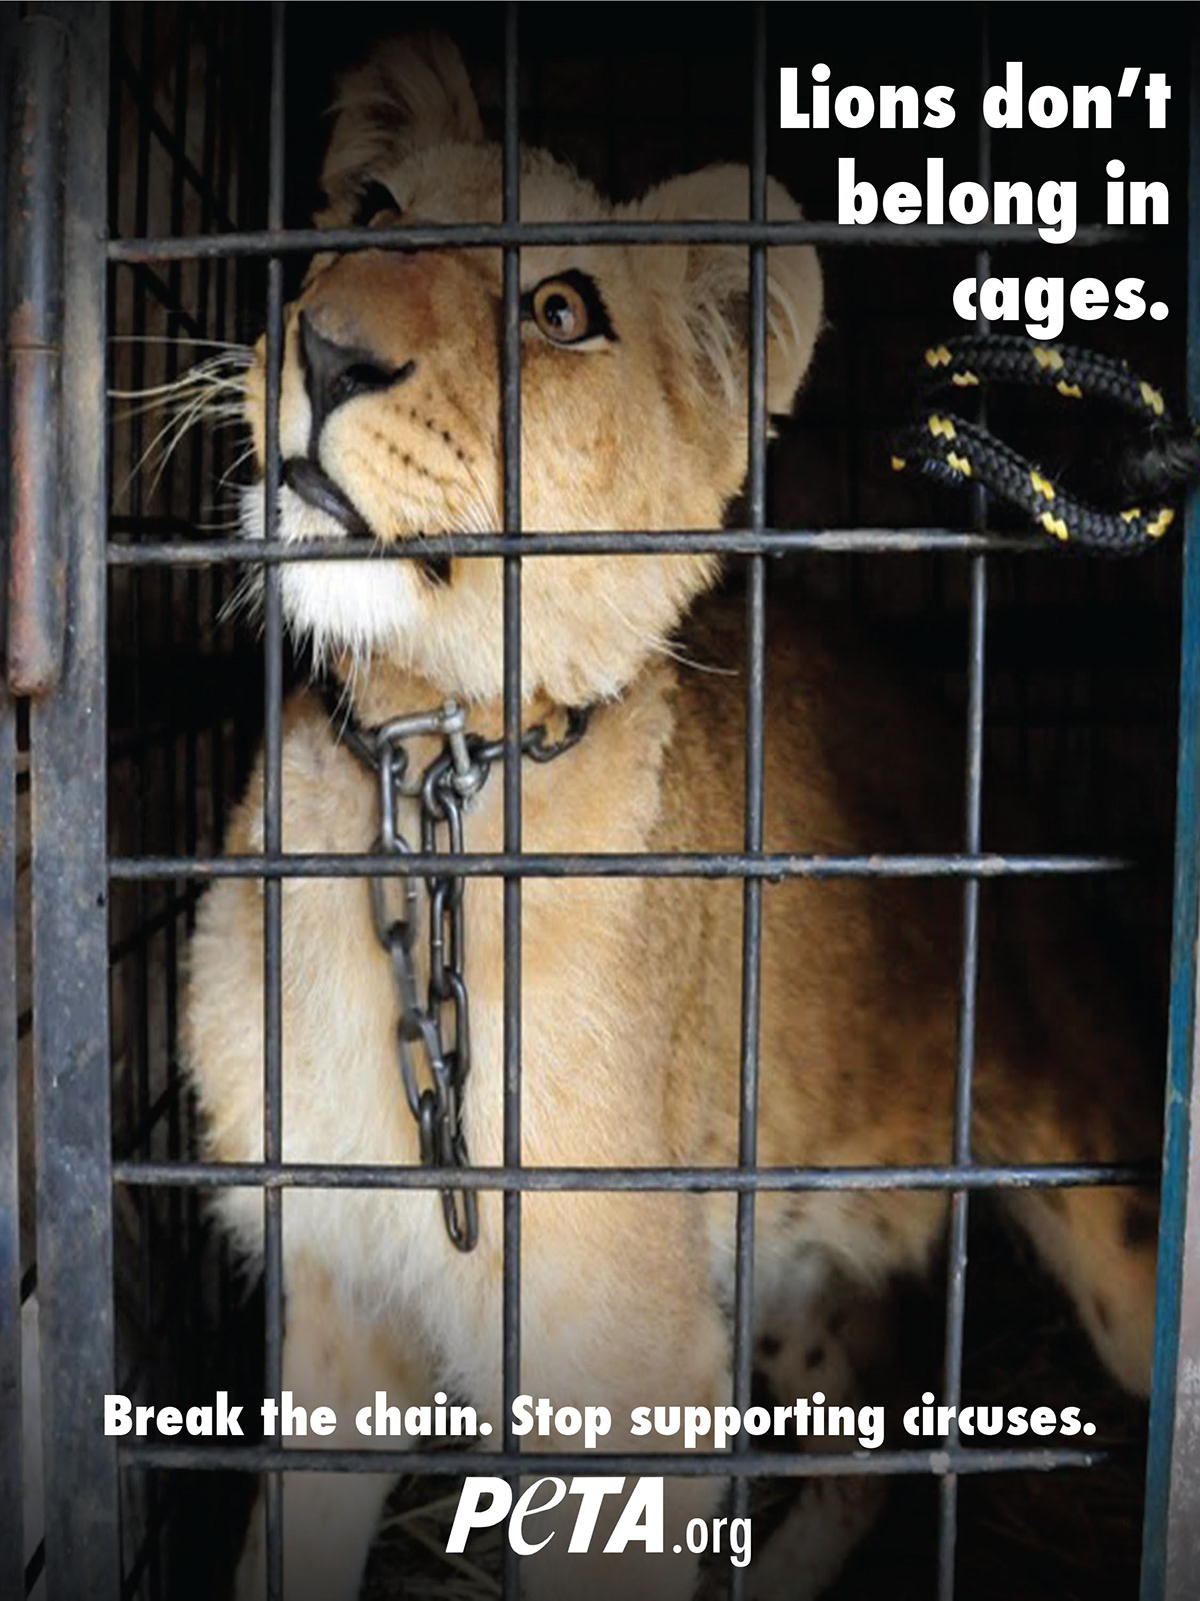 pain Peta Circus circus animals cages chains elephants Lions plight message campaign Issues